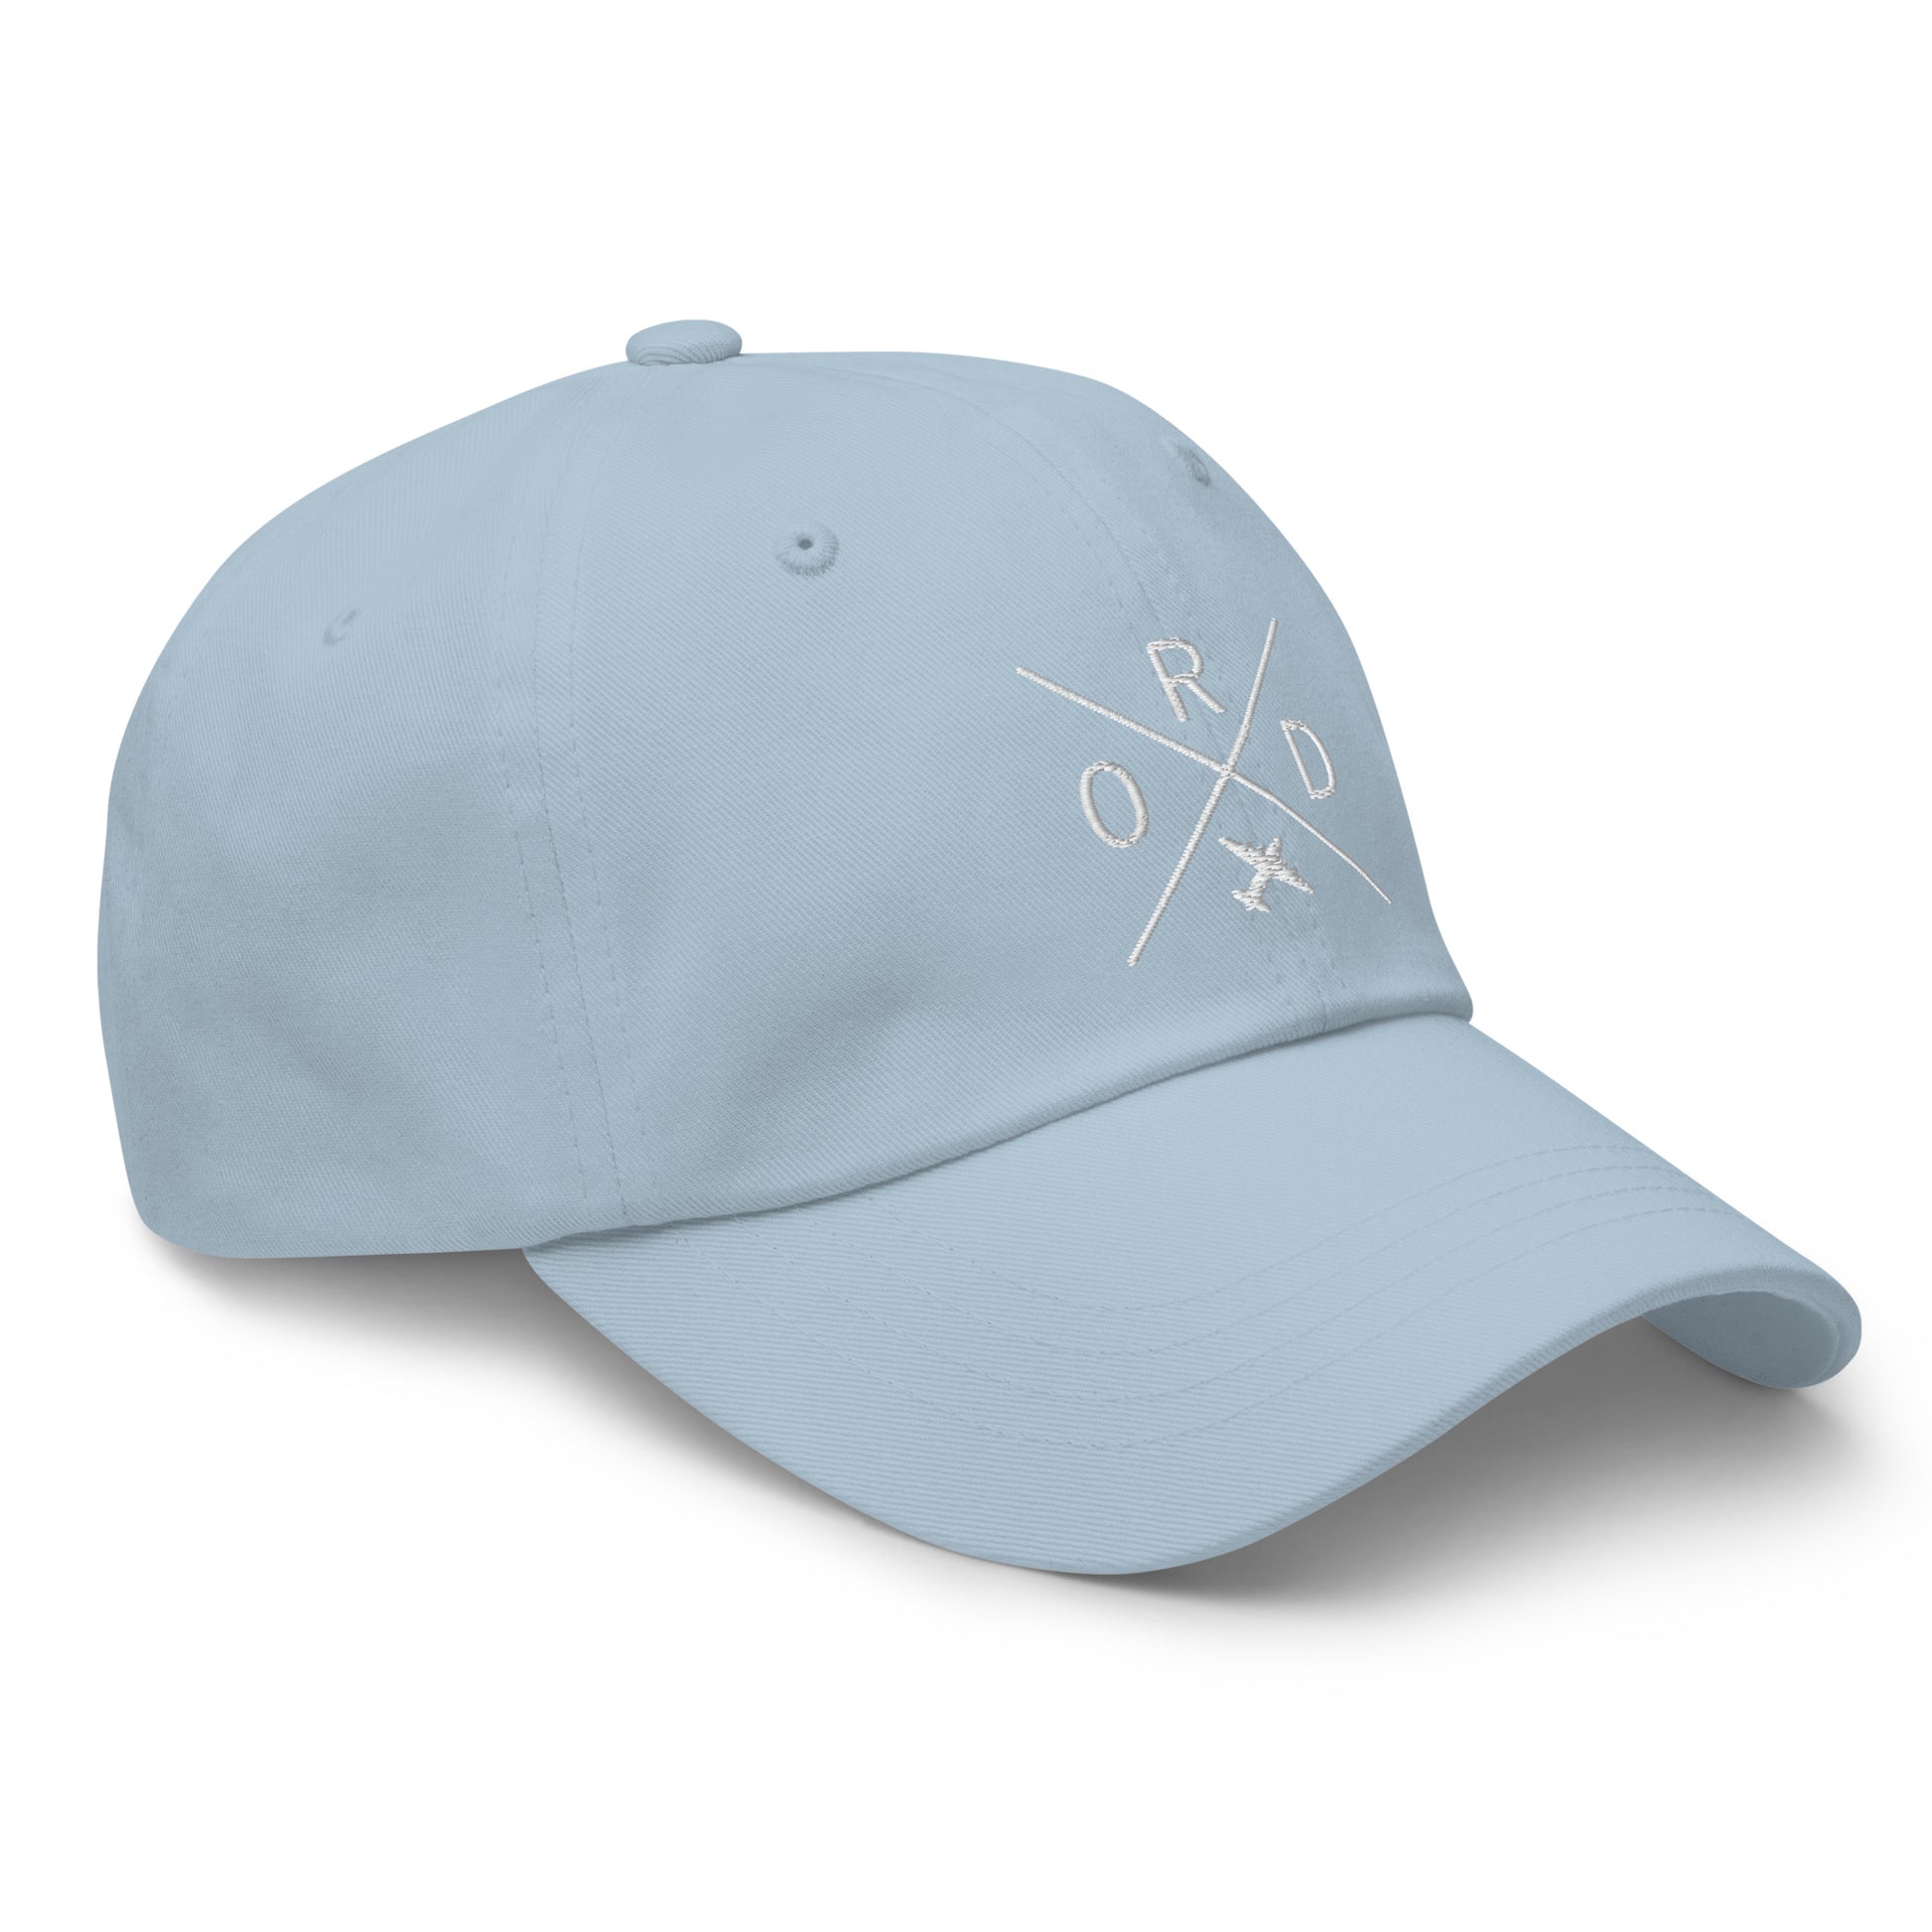 Crossed-X Dad Hat - White • ORD Chicago • YHM Designs - Image 29